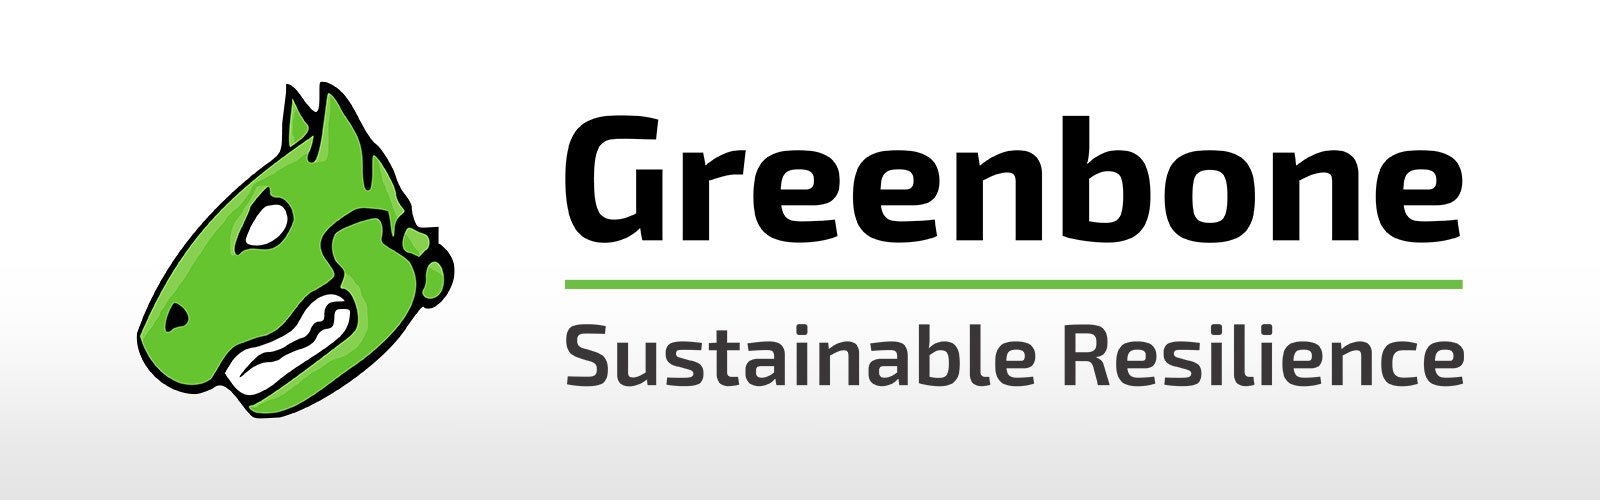 Greenbone - Sustainable Resilience